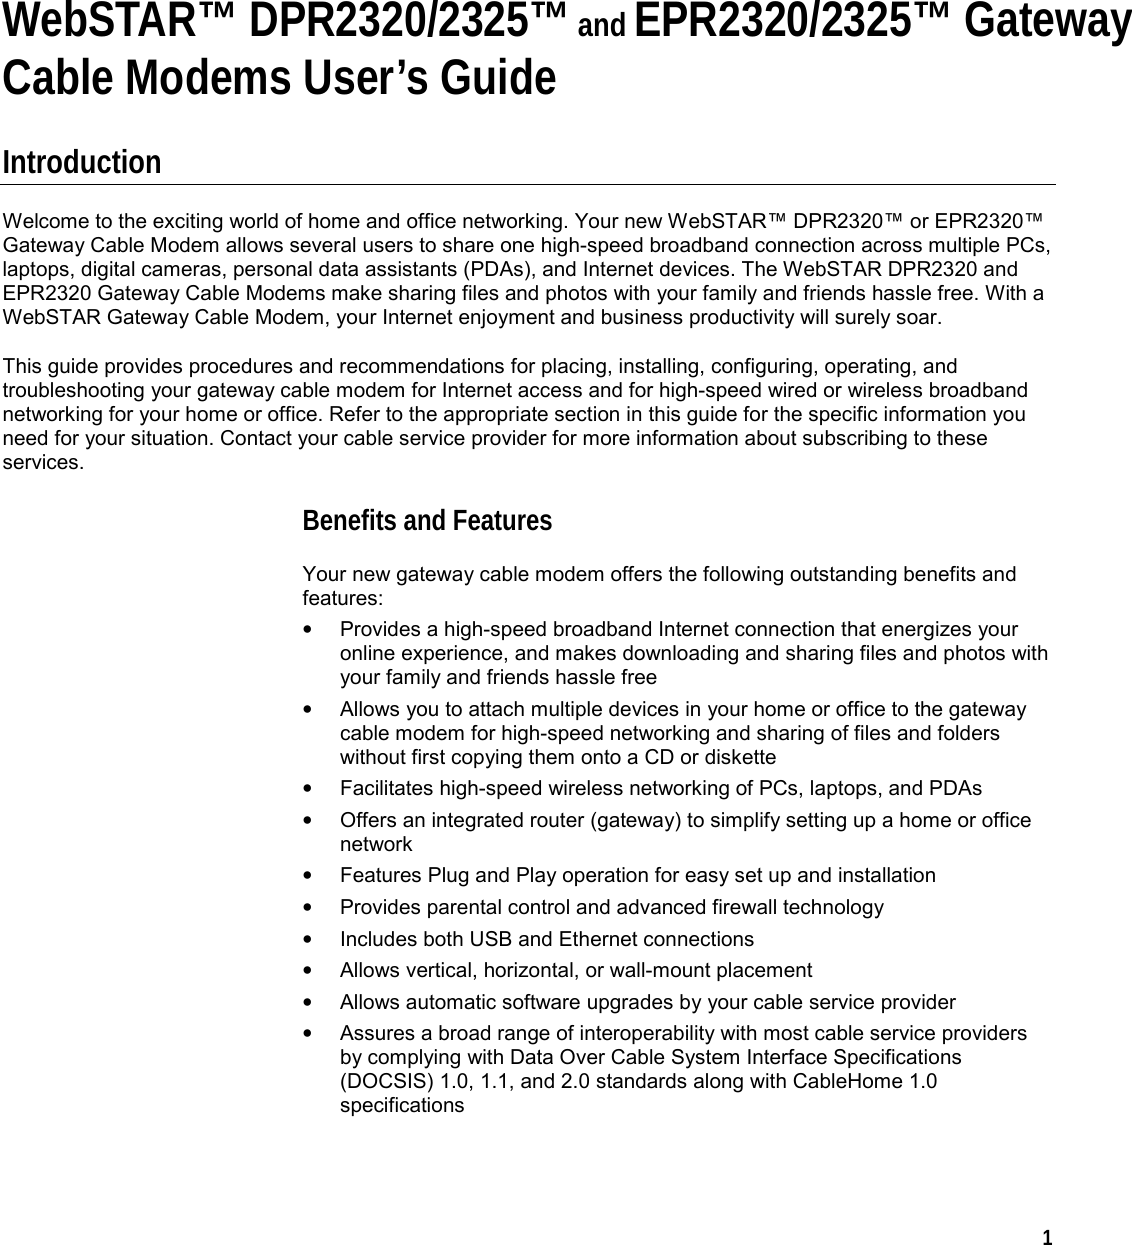  1   WebSTAR™ DPR2320/2325™ and EPR2320/2325™ GatewayCable Modems User’s Guide  Introduction Welcome to the exciting world of home and office networking. Your new WebSTAR™ DPR2320™ or EPR2320™ Gateway Cable Modem allows several users to share one high-speed broadband connection across multiple PCs, laptops, digital cameras, personal data assistants (PDAs), and Internet devices. The WebSTAR DPR2320 and EPR2320 Gateway Cable Modems make sharing files and photos with your family and friends hassle free. With a WebSTAR Gateway Cable Modem, your Internet enjoyment and business productivity will surely soar. This guide provides procedures and recommendations for placing, installing, configuring, operating, and troubleshooting your gateway cable modem for Internet access and for high-speed wired or wireless broadband networking for your home or office. Refer to the appropriate section in this guide for the specific information you need for your situation. Contact your cable service provider for more information about subscribing to these services. Benefits and Features Your new gateway cable modem offers the following outstanding benefits and features: •  Provides a high-speed broadband Internet connection that energizes your online experience, and makes downloading and sharing files and photos with your family and friends hassle free •  Allows you to attach multiple devices in your home or office to the gateway cable modem for high-speed networking and sharing of files and folders without first copying them onto a CD or diskette •  Facilitates high-speed wireless networking of PCs, laptops, and PDAs •  Offers an integrated router (gateway) to simplify setting up a home or office network •  Features Plug and Play operation for easy set up and installation •  Provides parental control and advanced firewall technology •  Includes both USB and Ethernet connections •  Allows vertical, horizontal, or wall-mount placement •  Allows automatic software upgrades by your cable service provider •  Assures a broad range of interoperability with most cable service providers by complying with Data Over Cable System Interface Specifications (DOCSIS) 1.0, 1.1, and 2.0 standards along with CableHome 1.0 specifications    